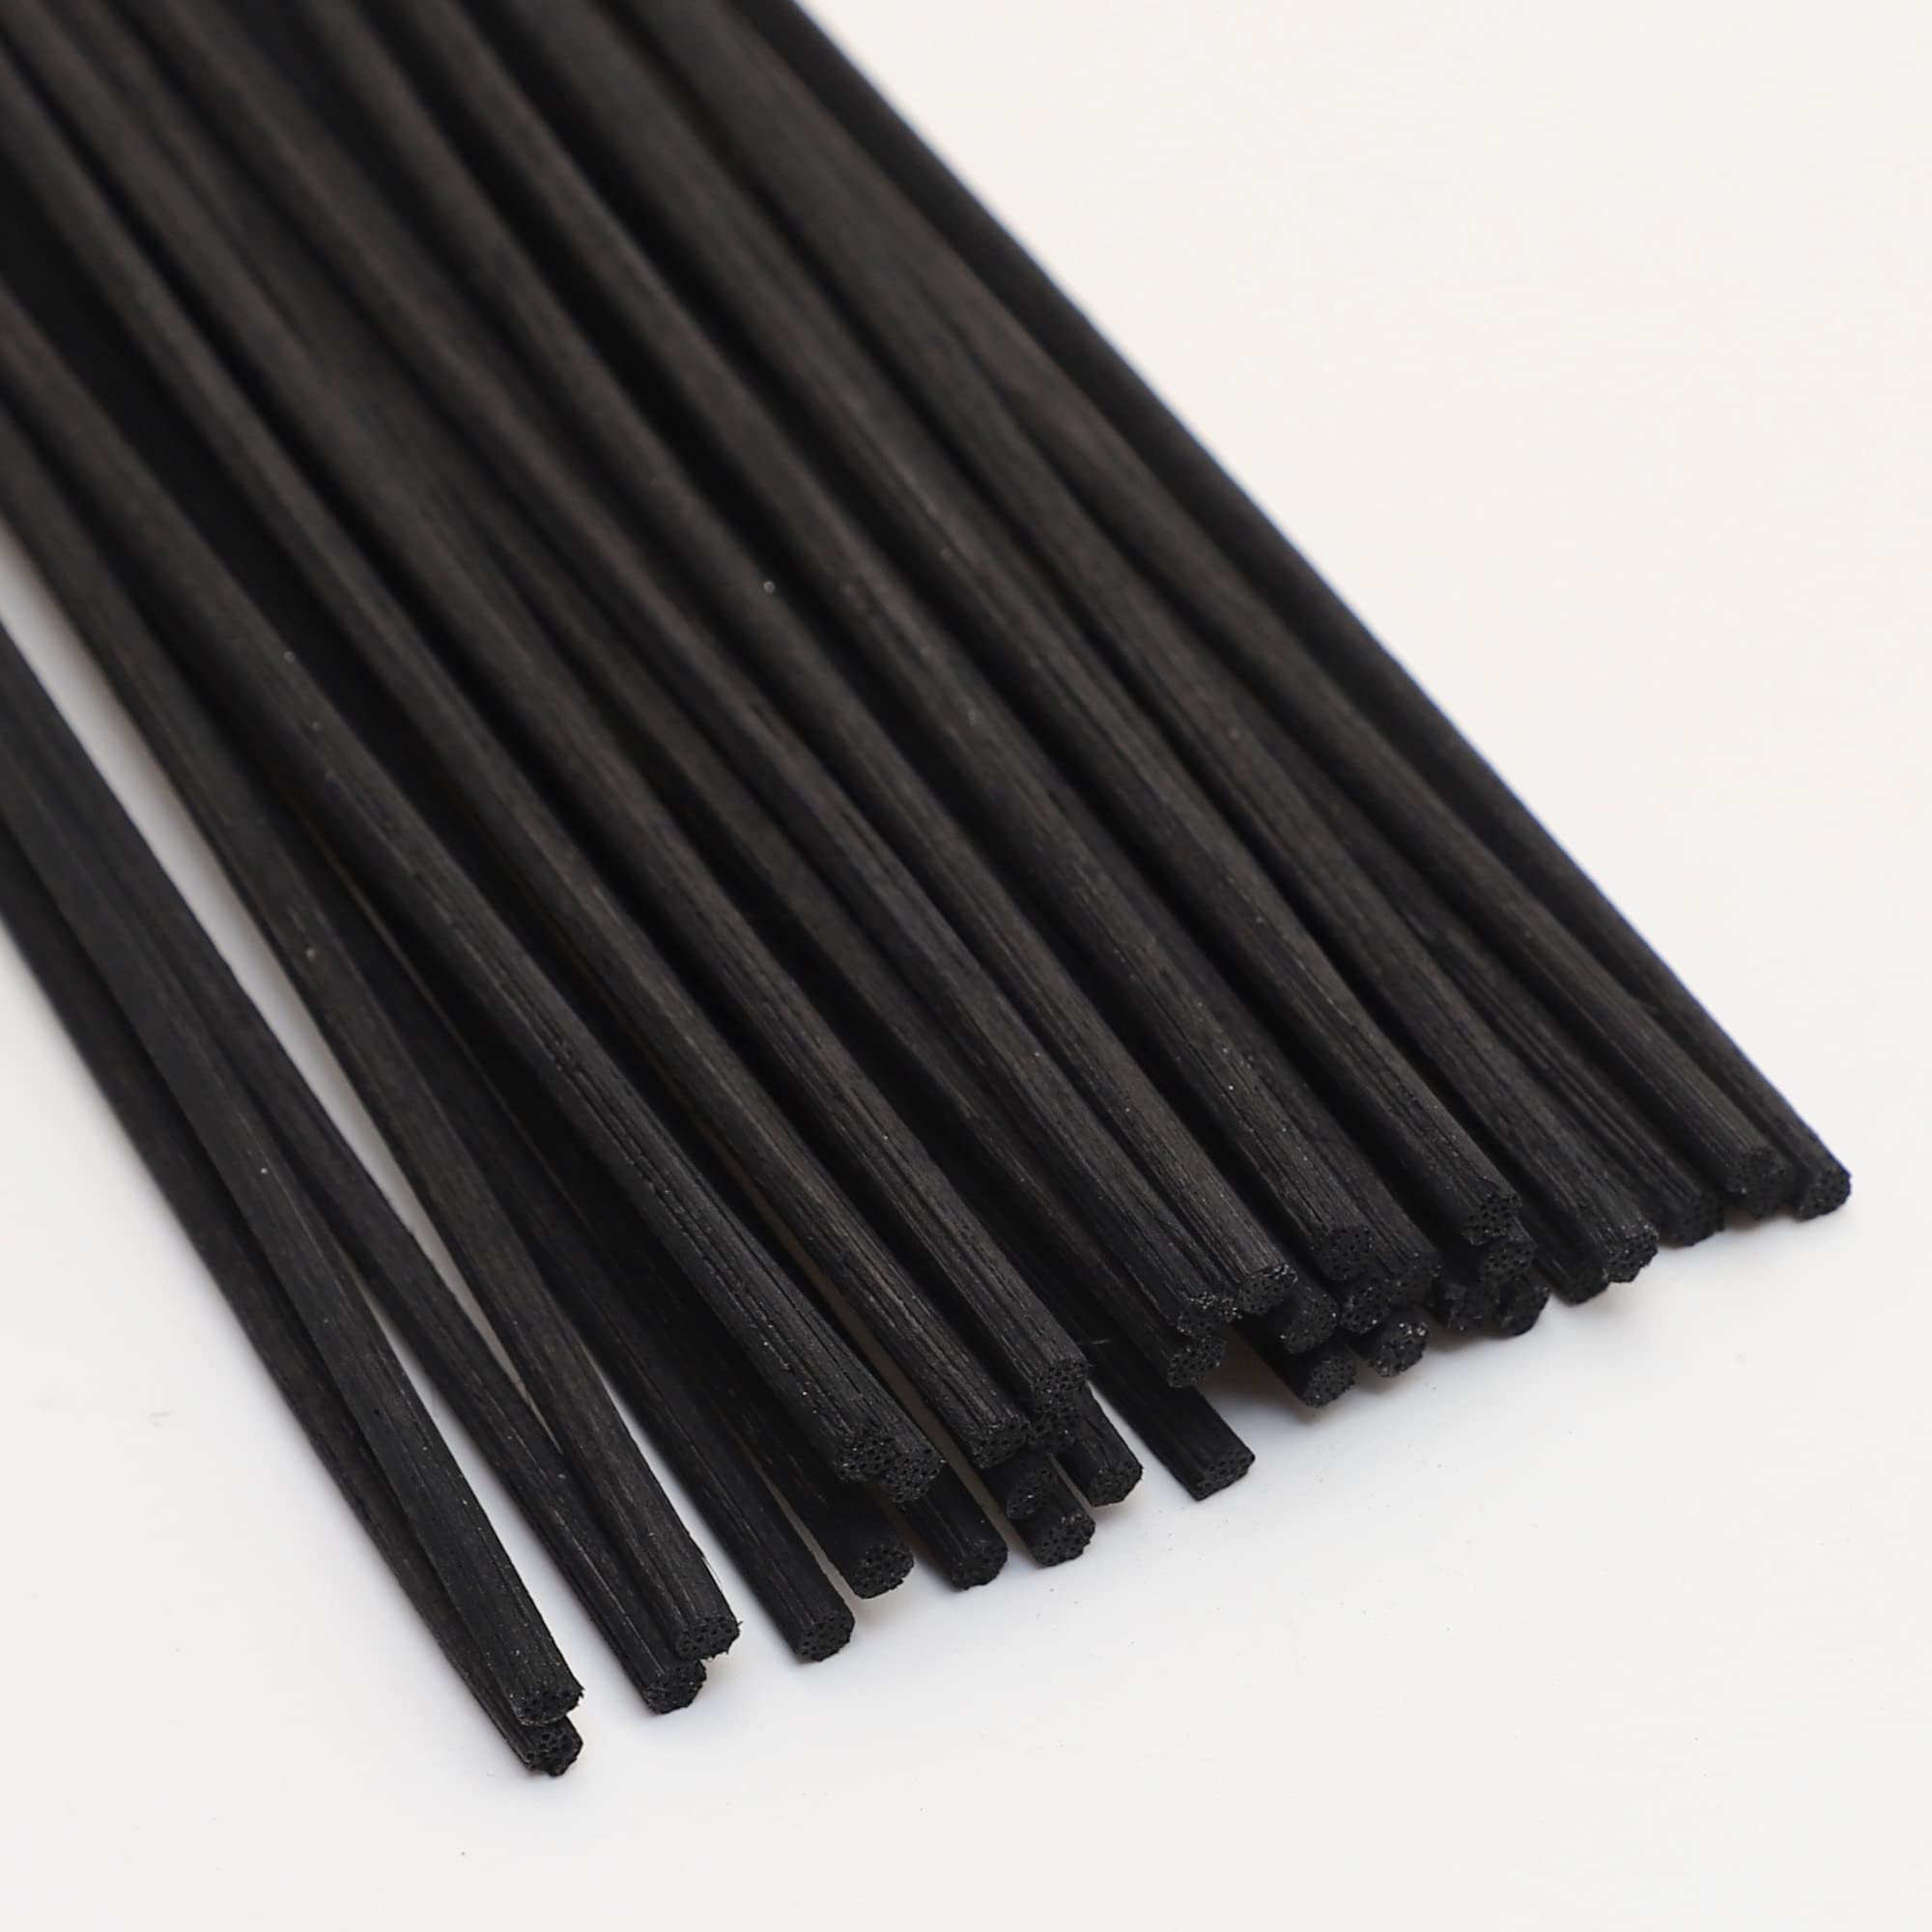 3 mm in Diameter Indonesia Imported Rattan Natural And Black Color Wooden Aroma Oil Evaporative Diffuser Rattan Reed Sticks for Home Aroma Scents 